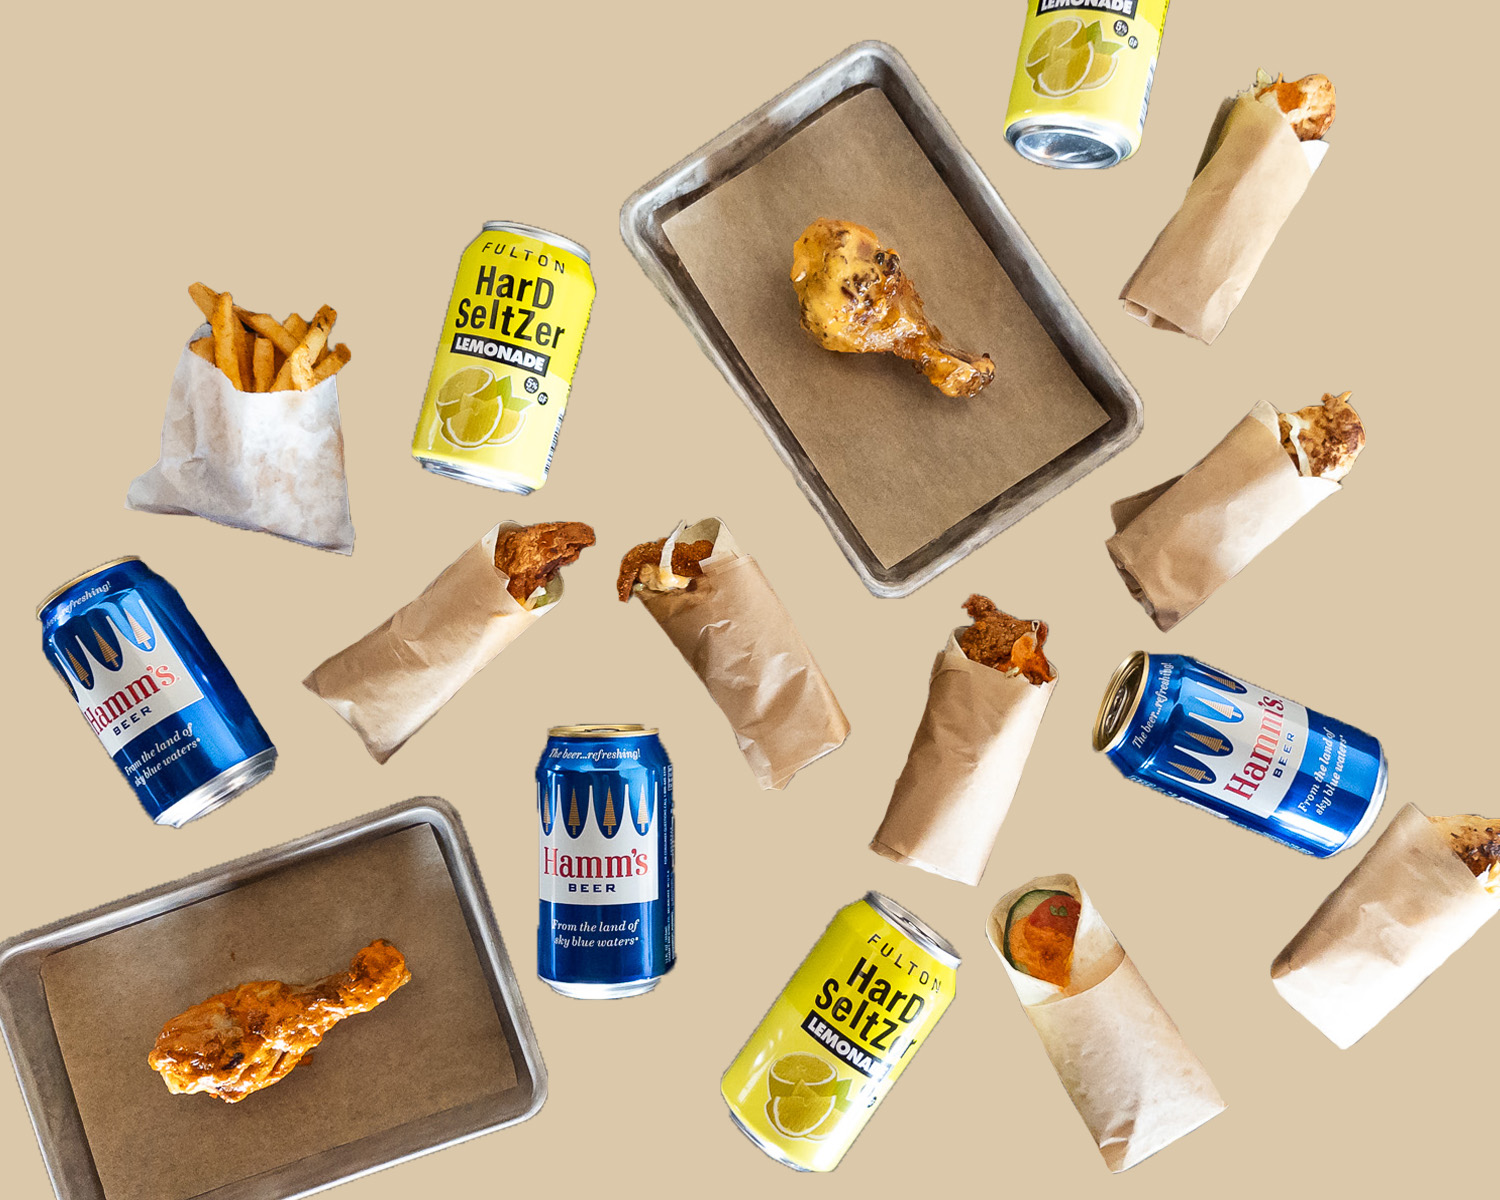 An assortment of chicken snack wraps in brown paper, drumsticks on small trays lined with brown paper, French fries in white paper bag, and cans of Hamm’s beer and hard lemonade cut out and arranged on a tan background. 